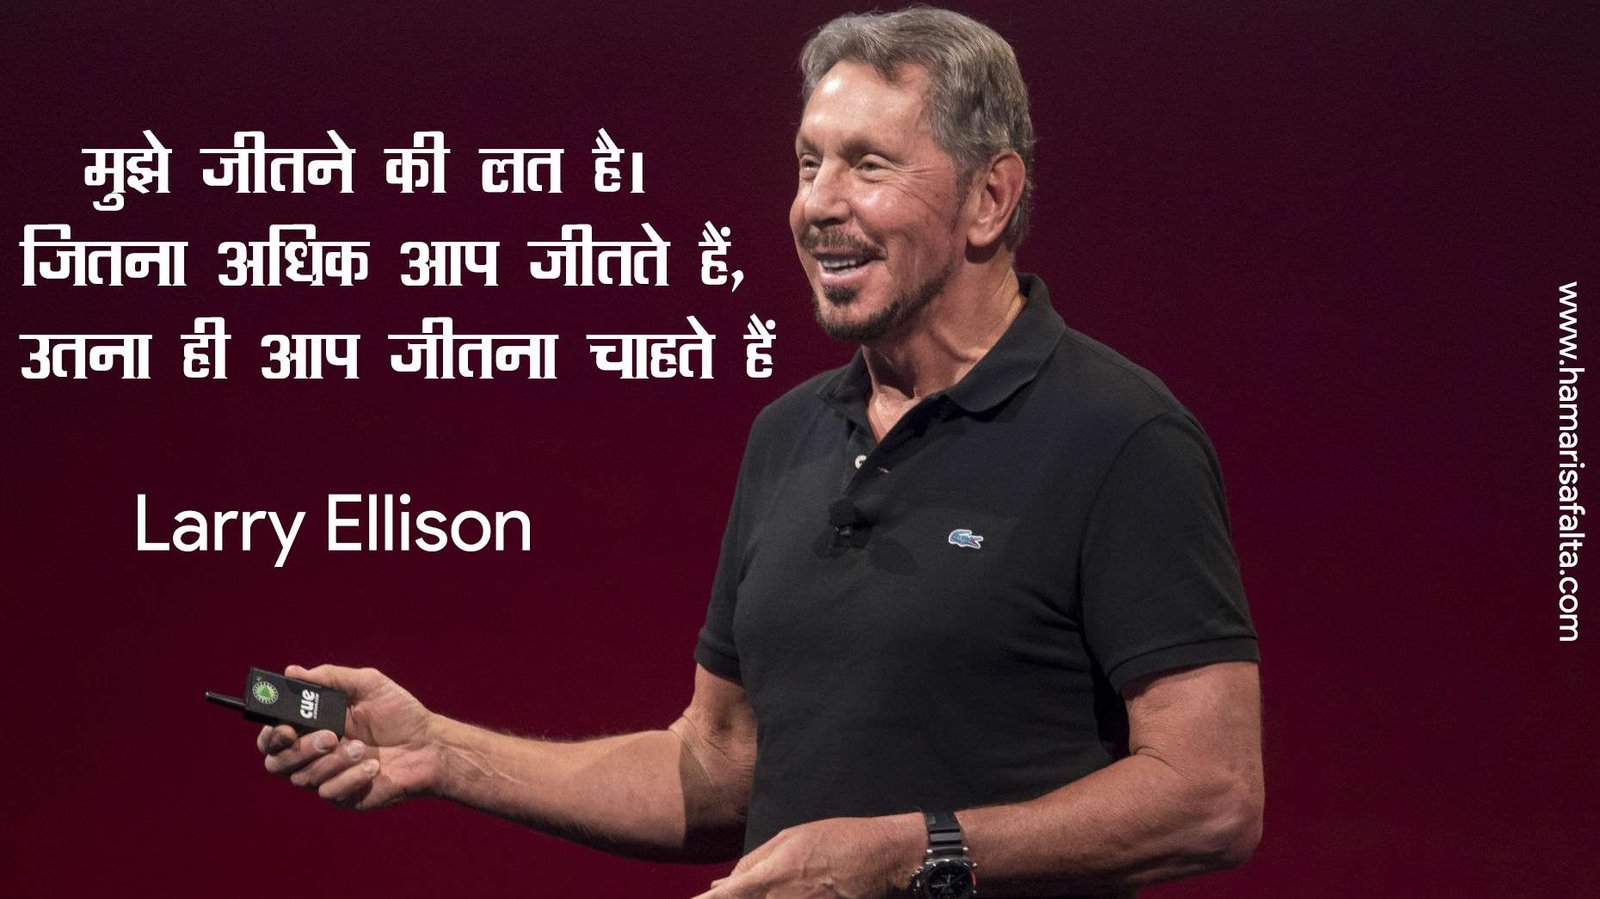 Larry-Ellison-Motivational-Thoughts-in-Hindi